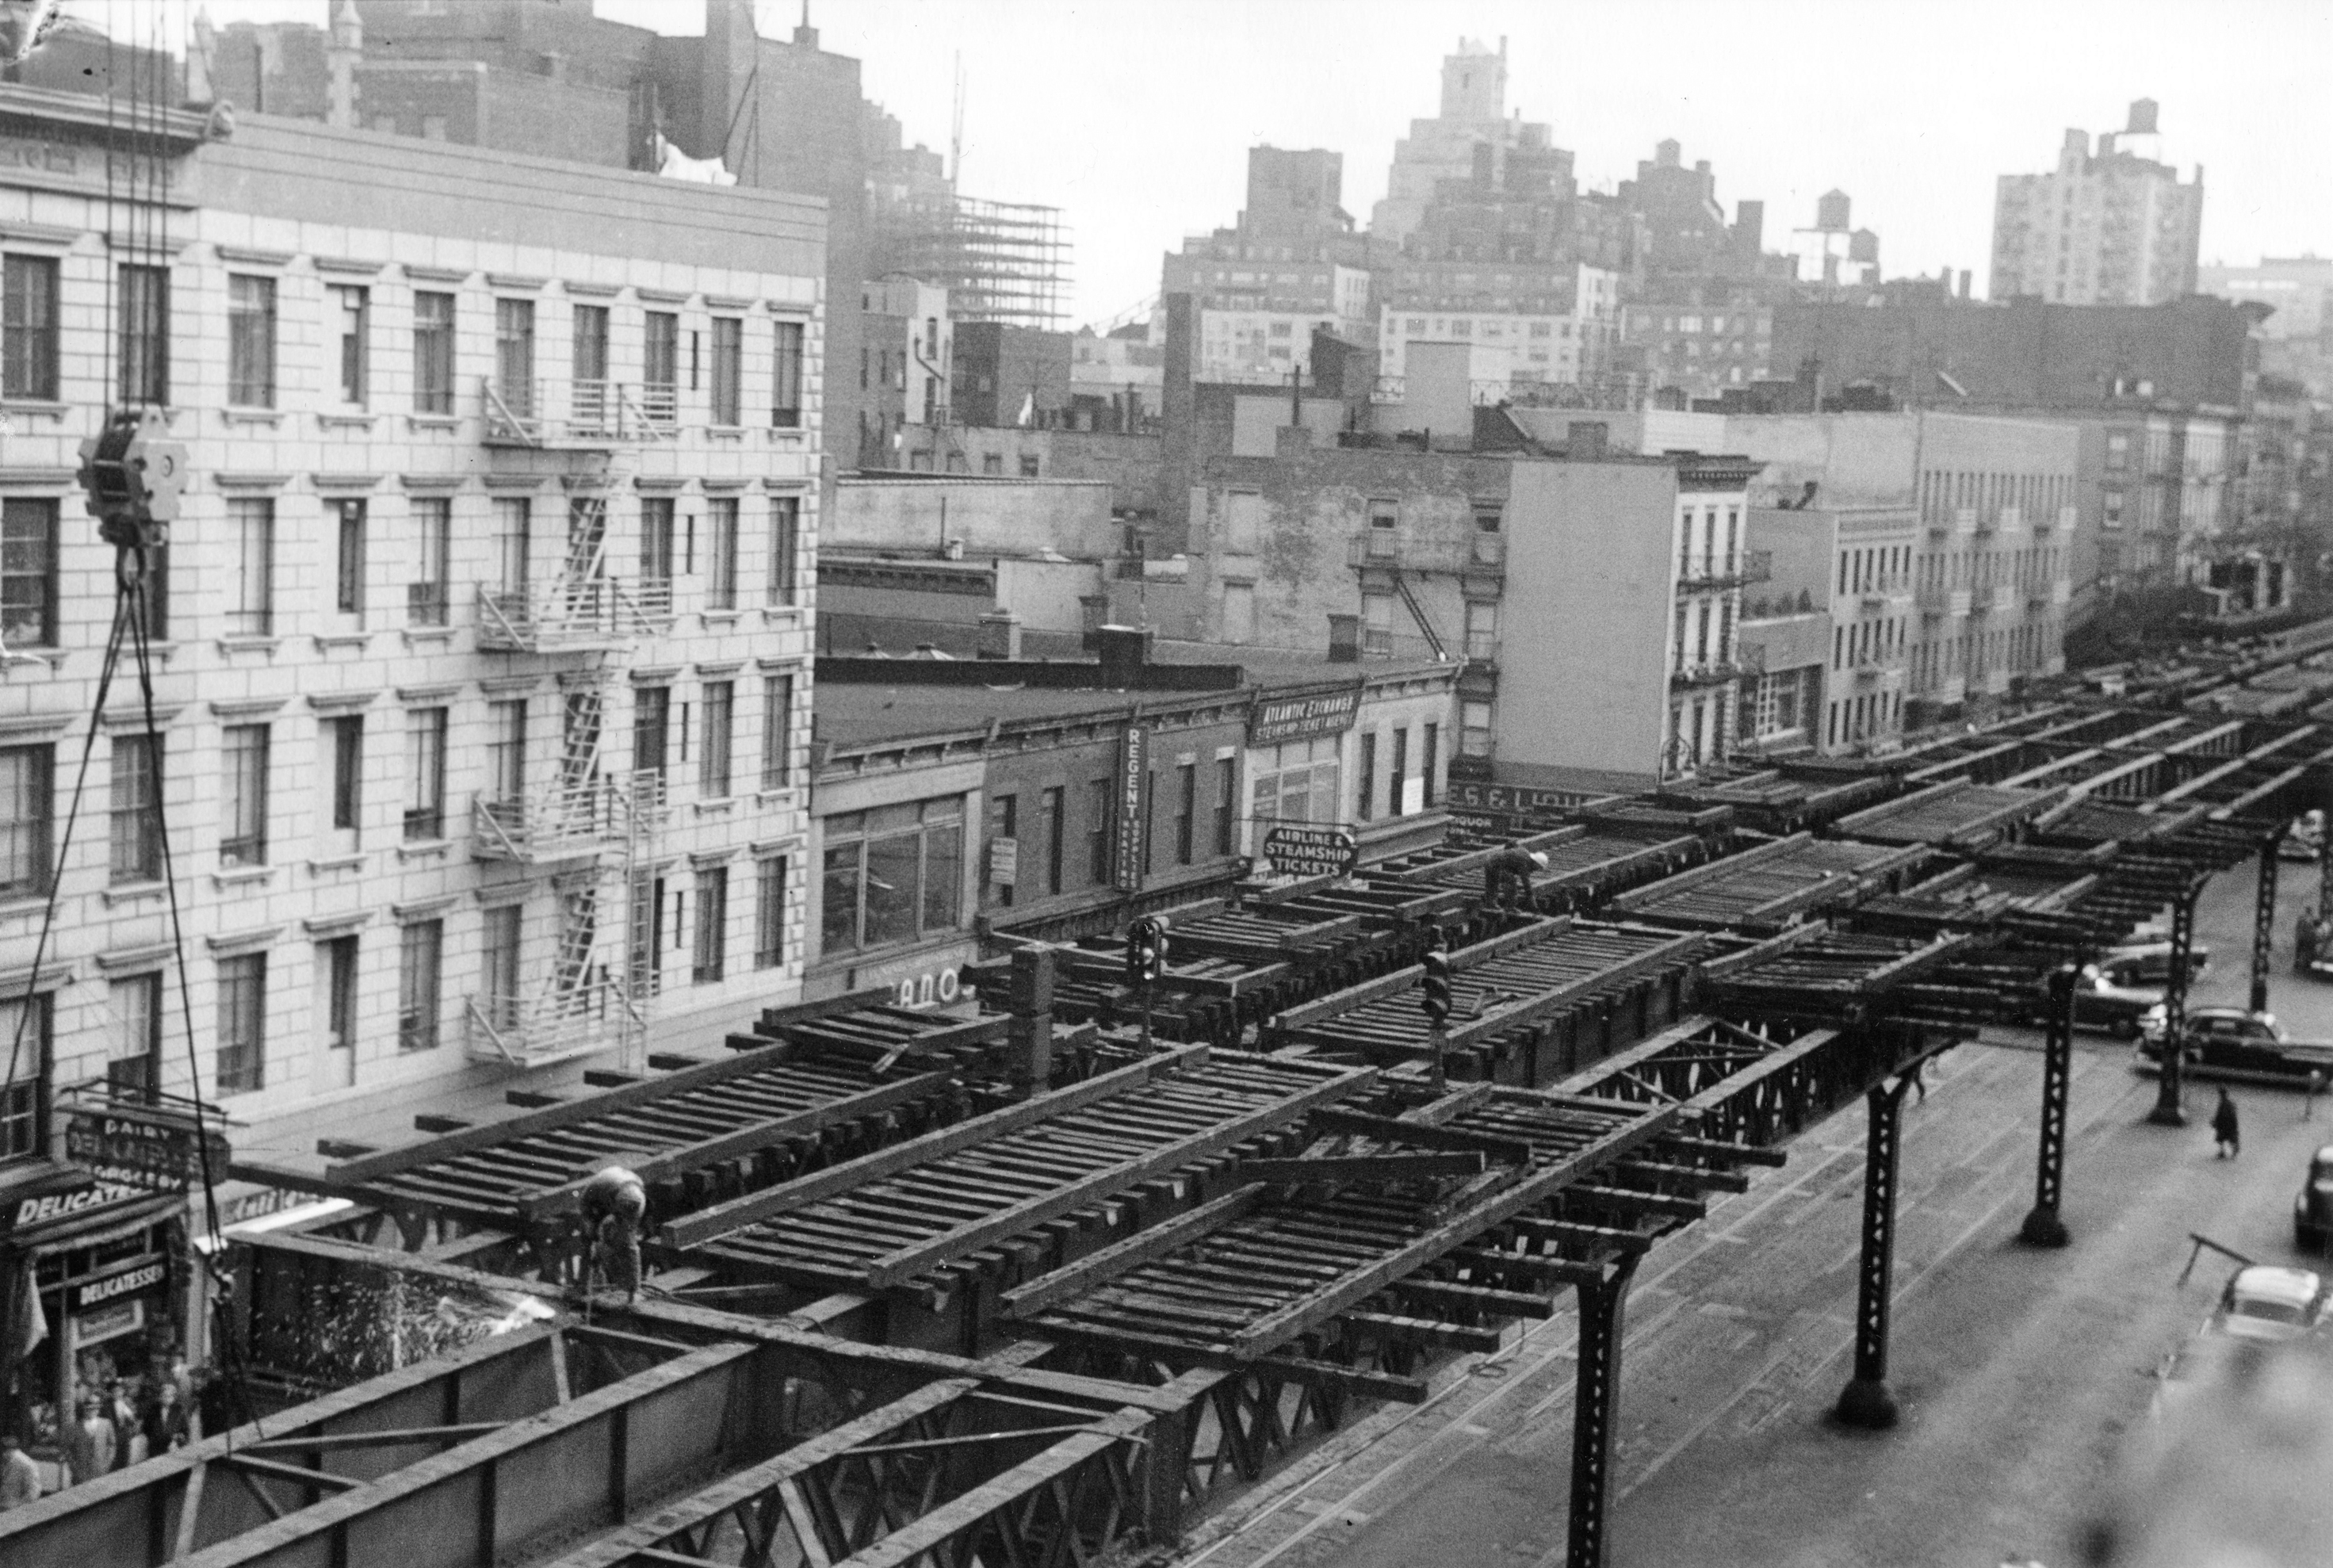 The Third Avenue Elevated tracks.